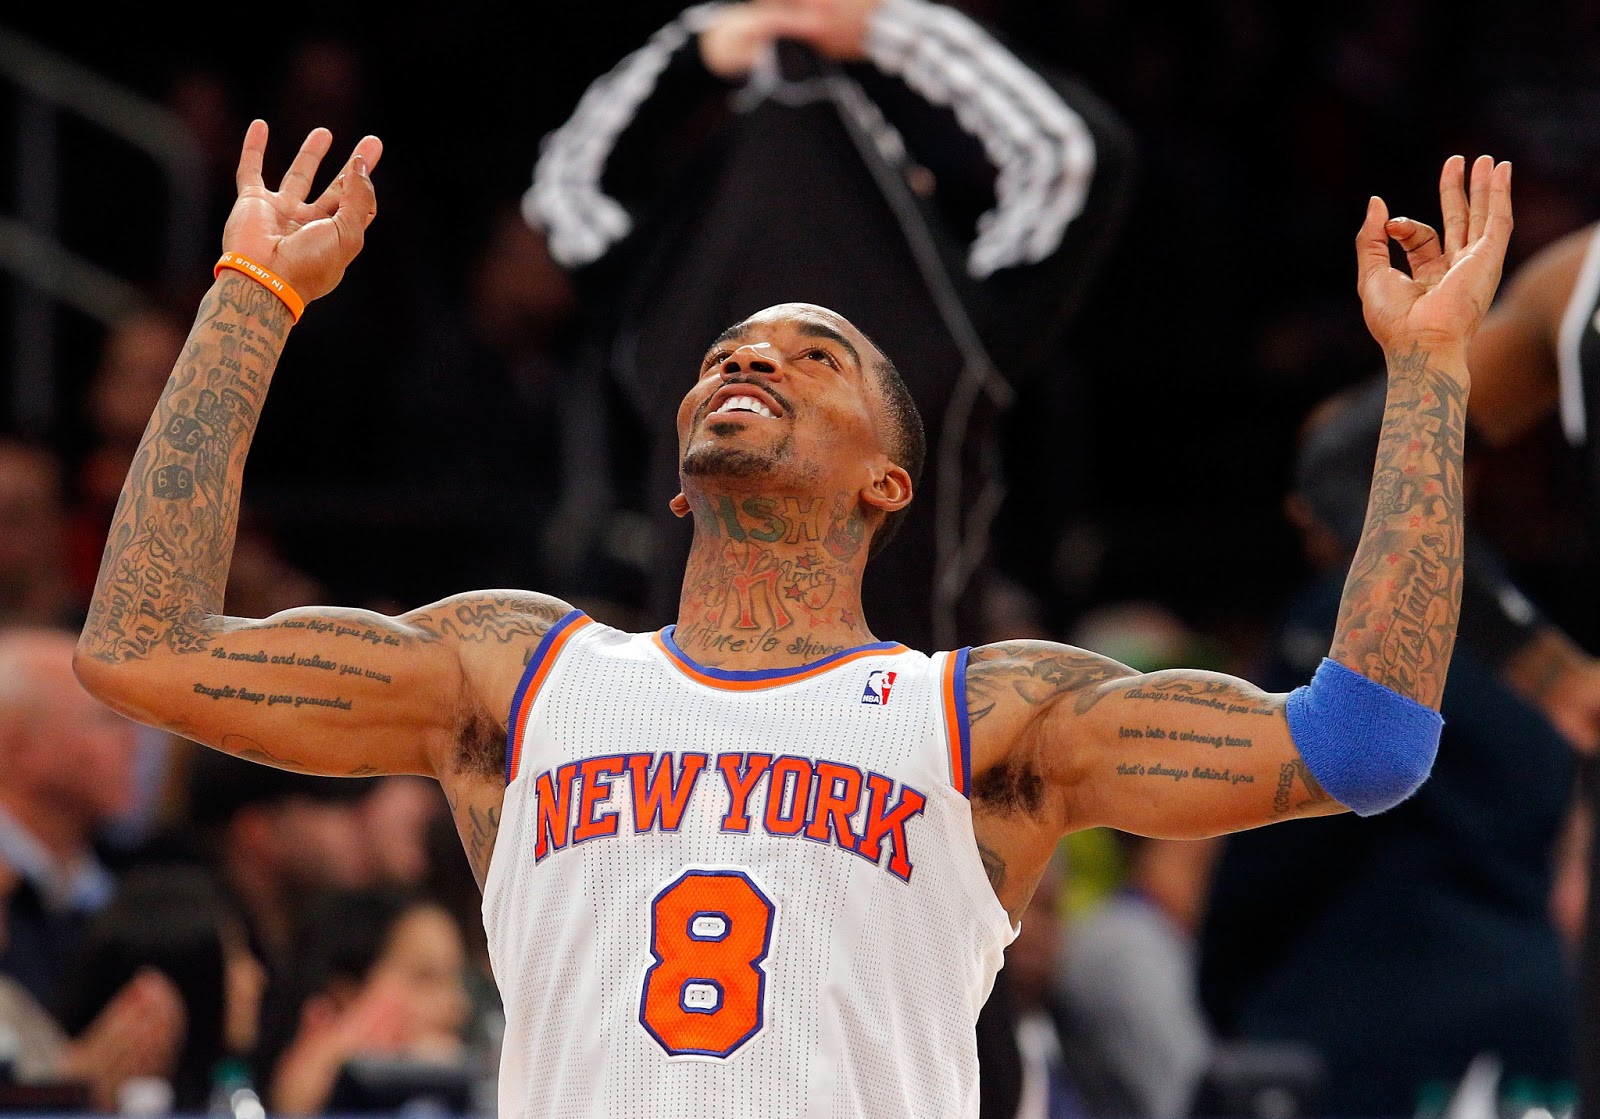 theKONGBLOG™: J.R. Smith is the NBA's Sixth Man of the Year 2012-2013